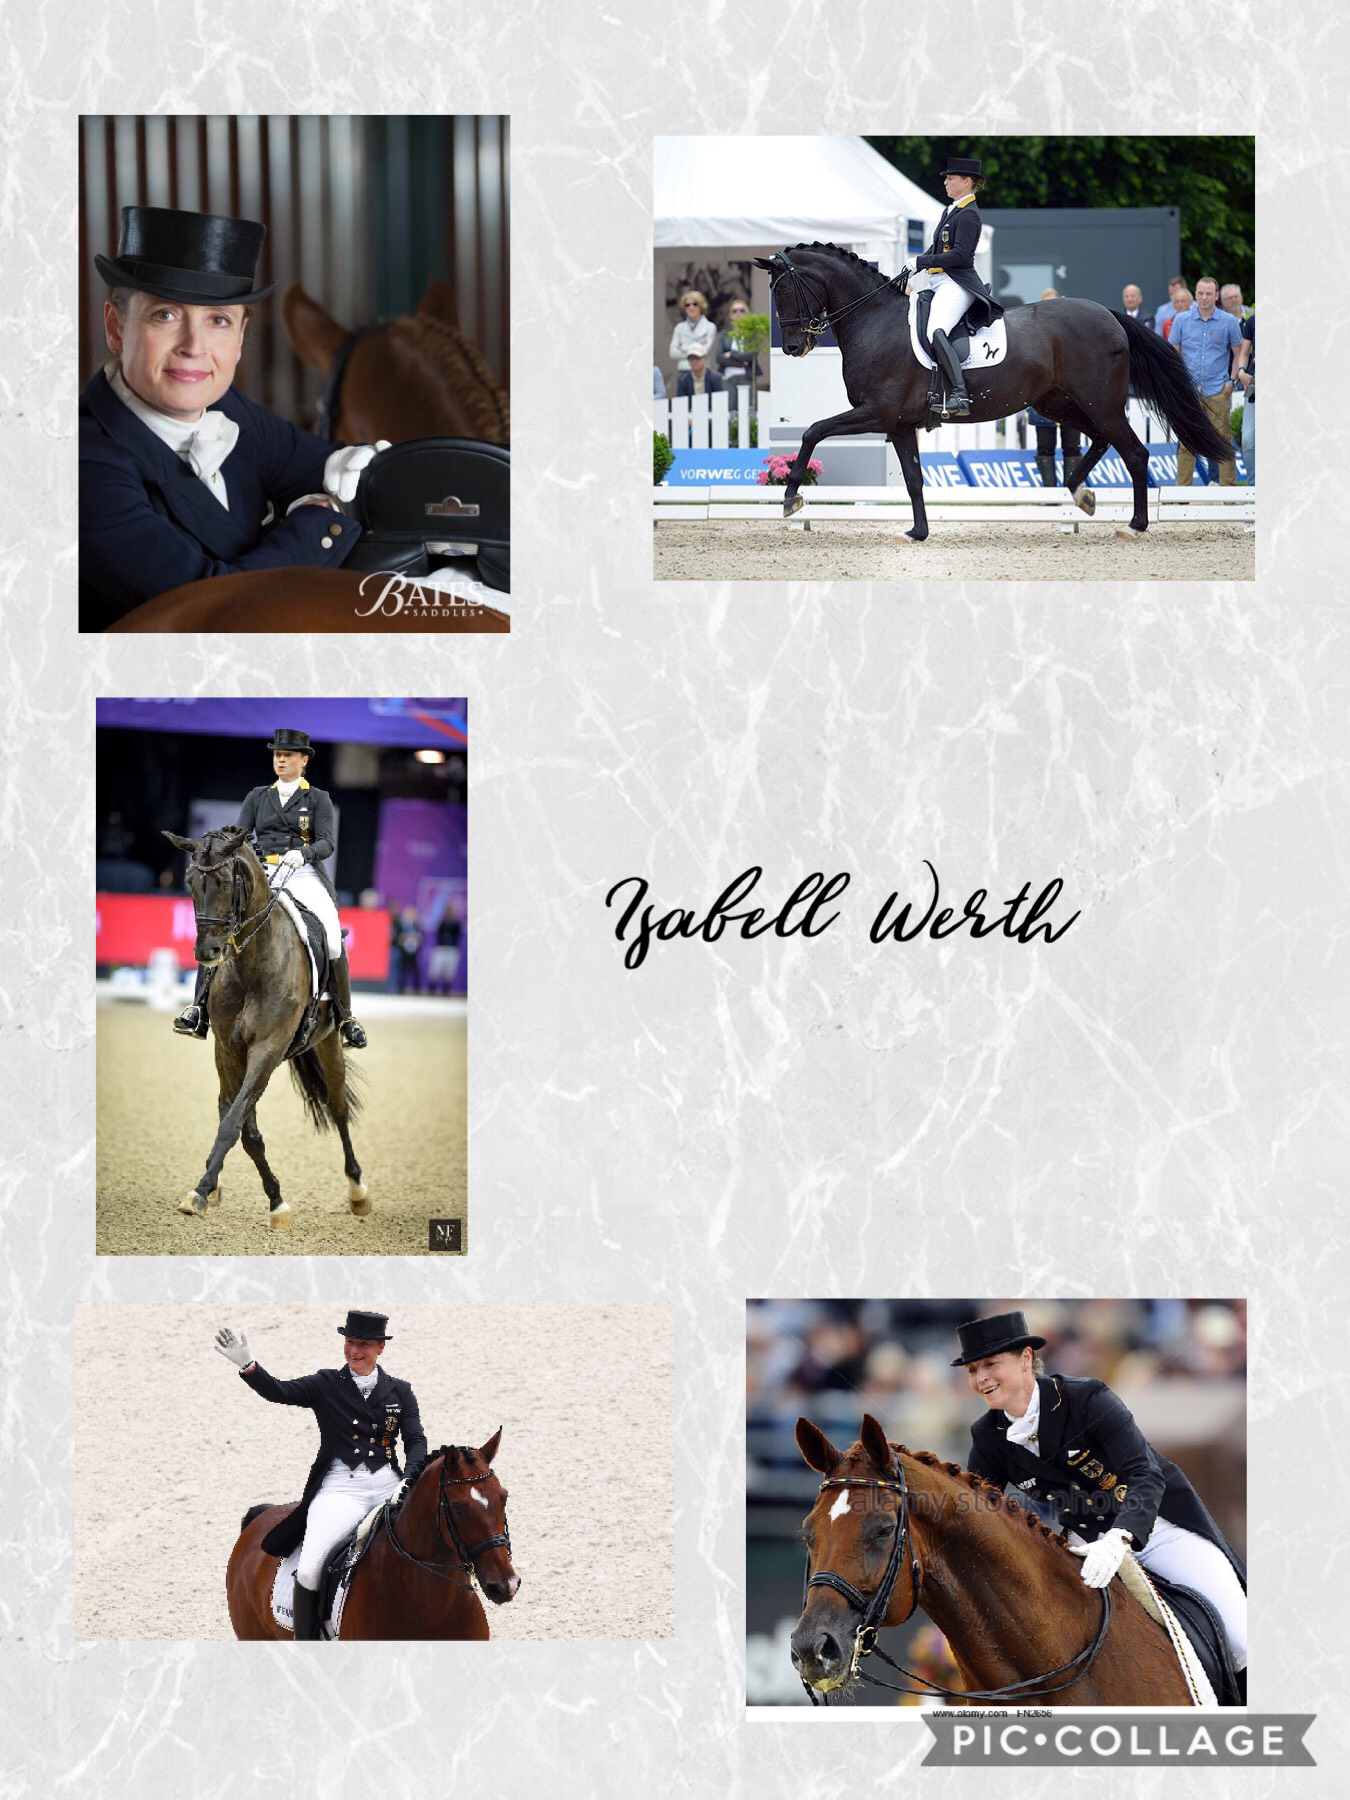 🇩🇪 The unbeatable queen of dressage - Isabell Werth 🇩🇪